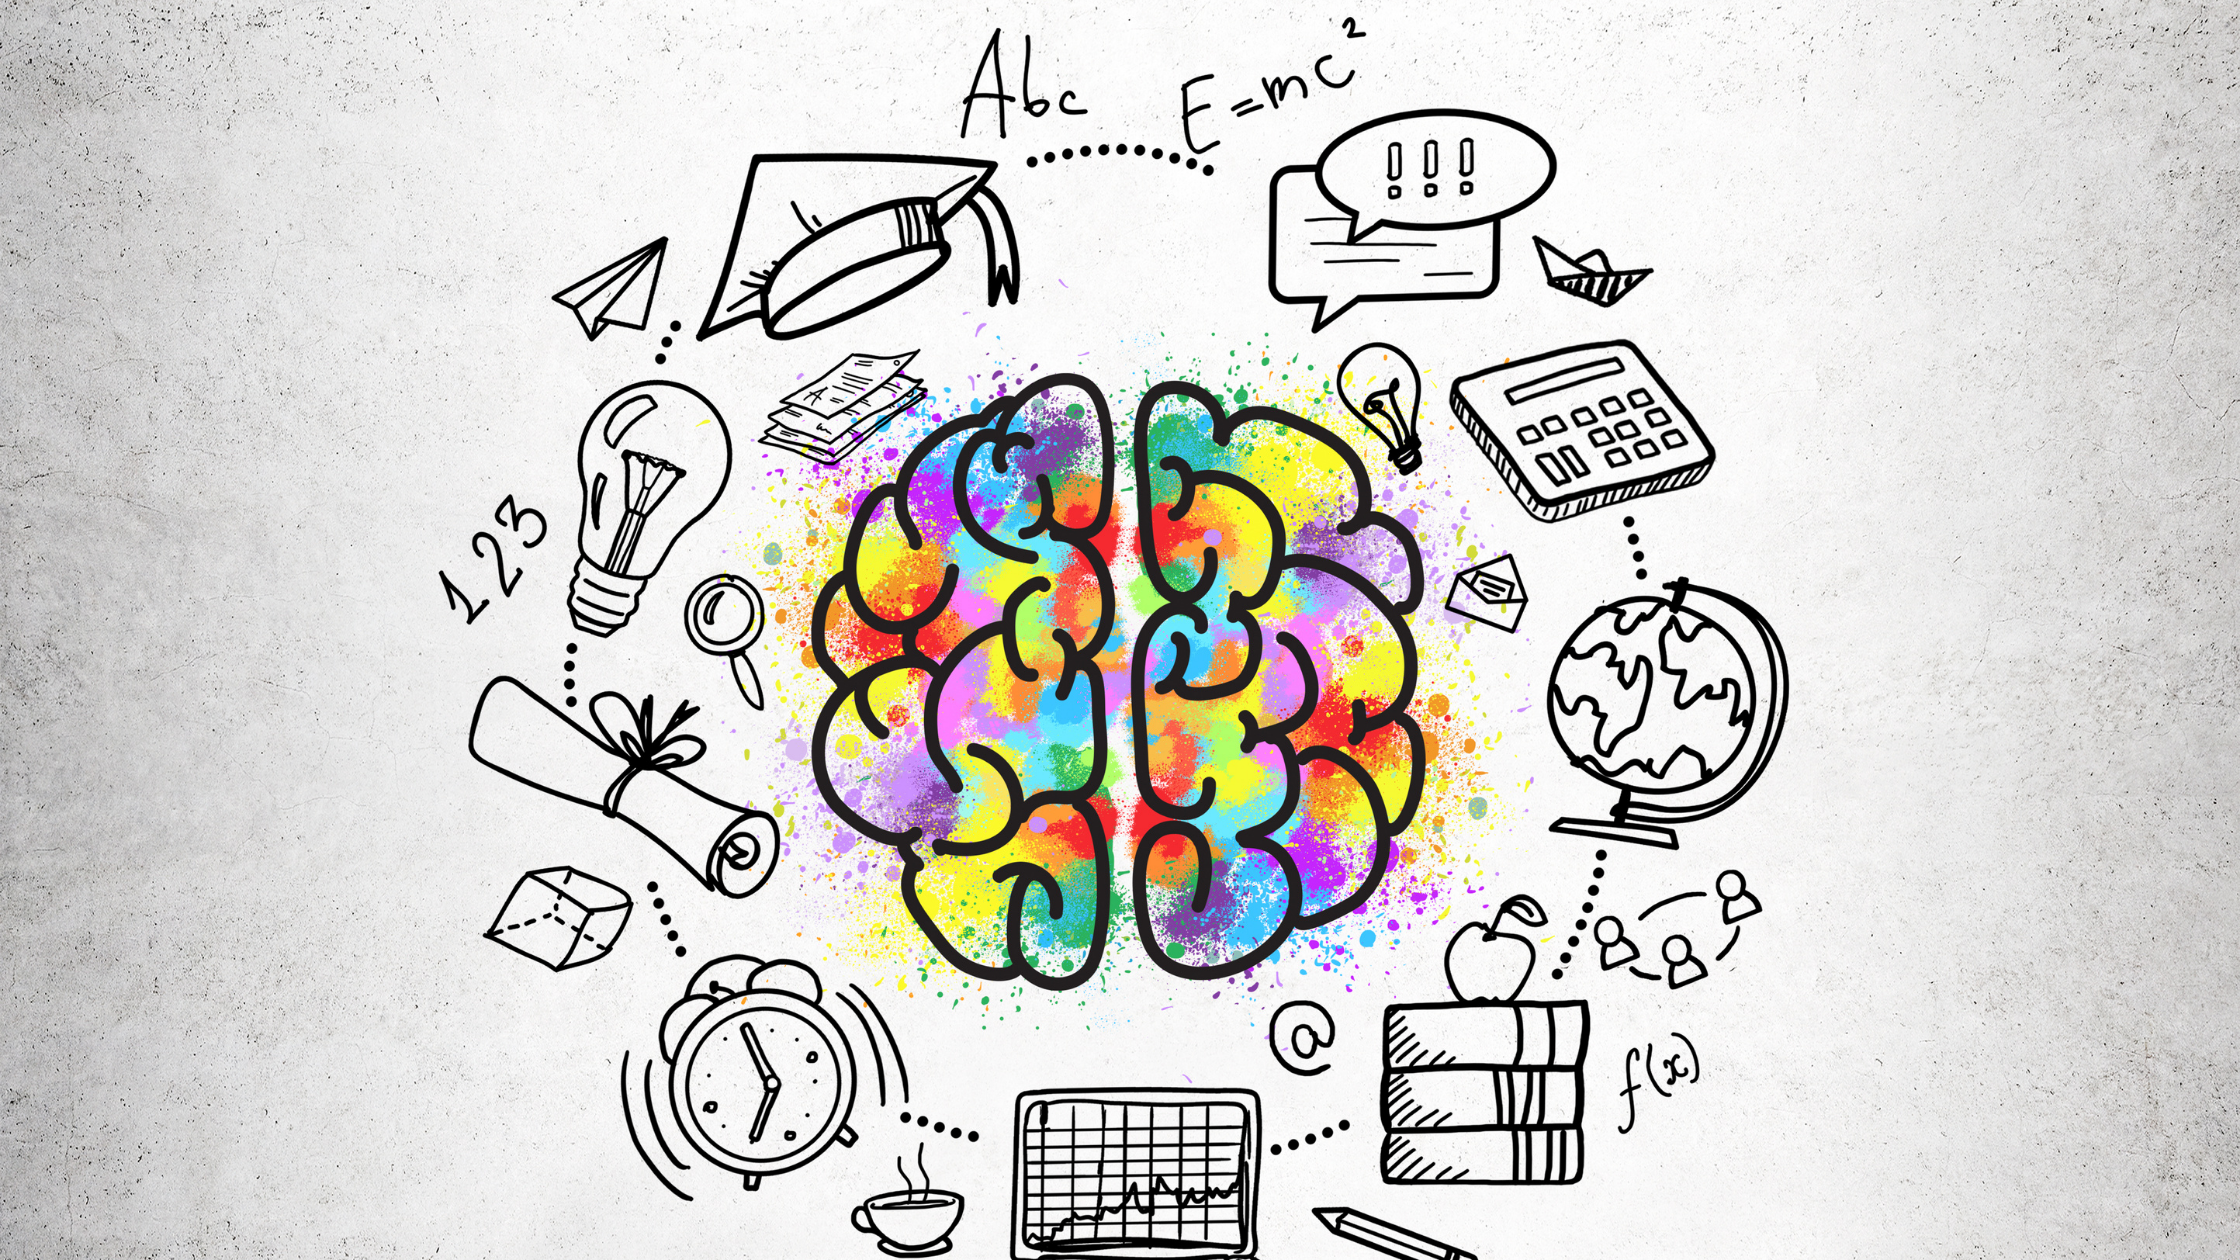 Illustration of colorful brain surrounded by books, globes, machines, lightbulbs, and other thoughts